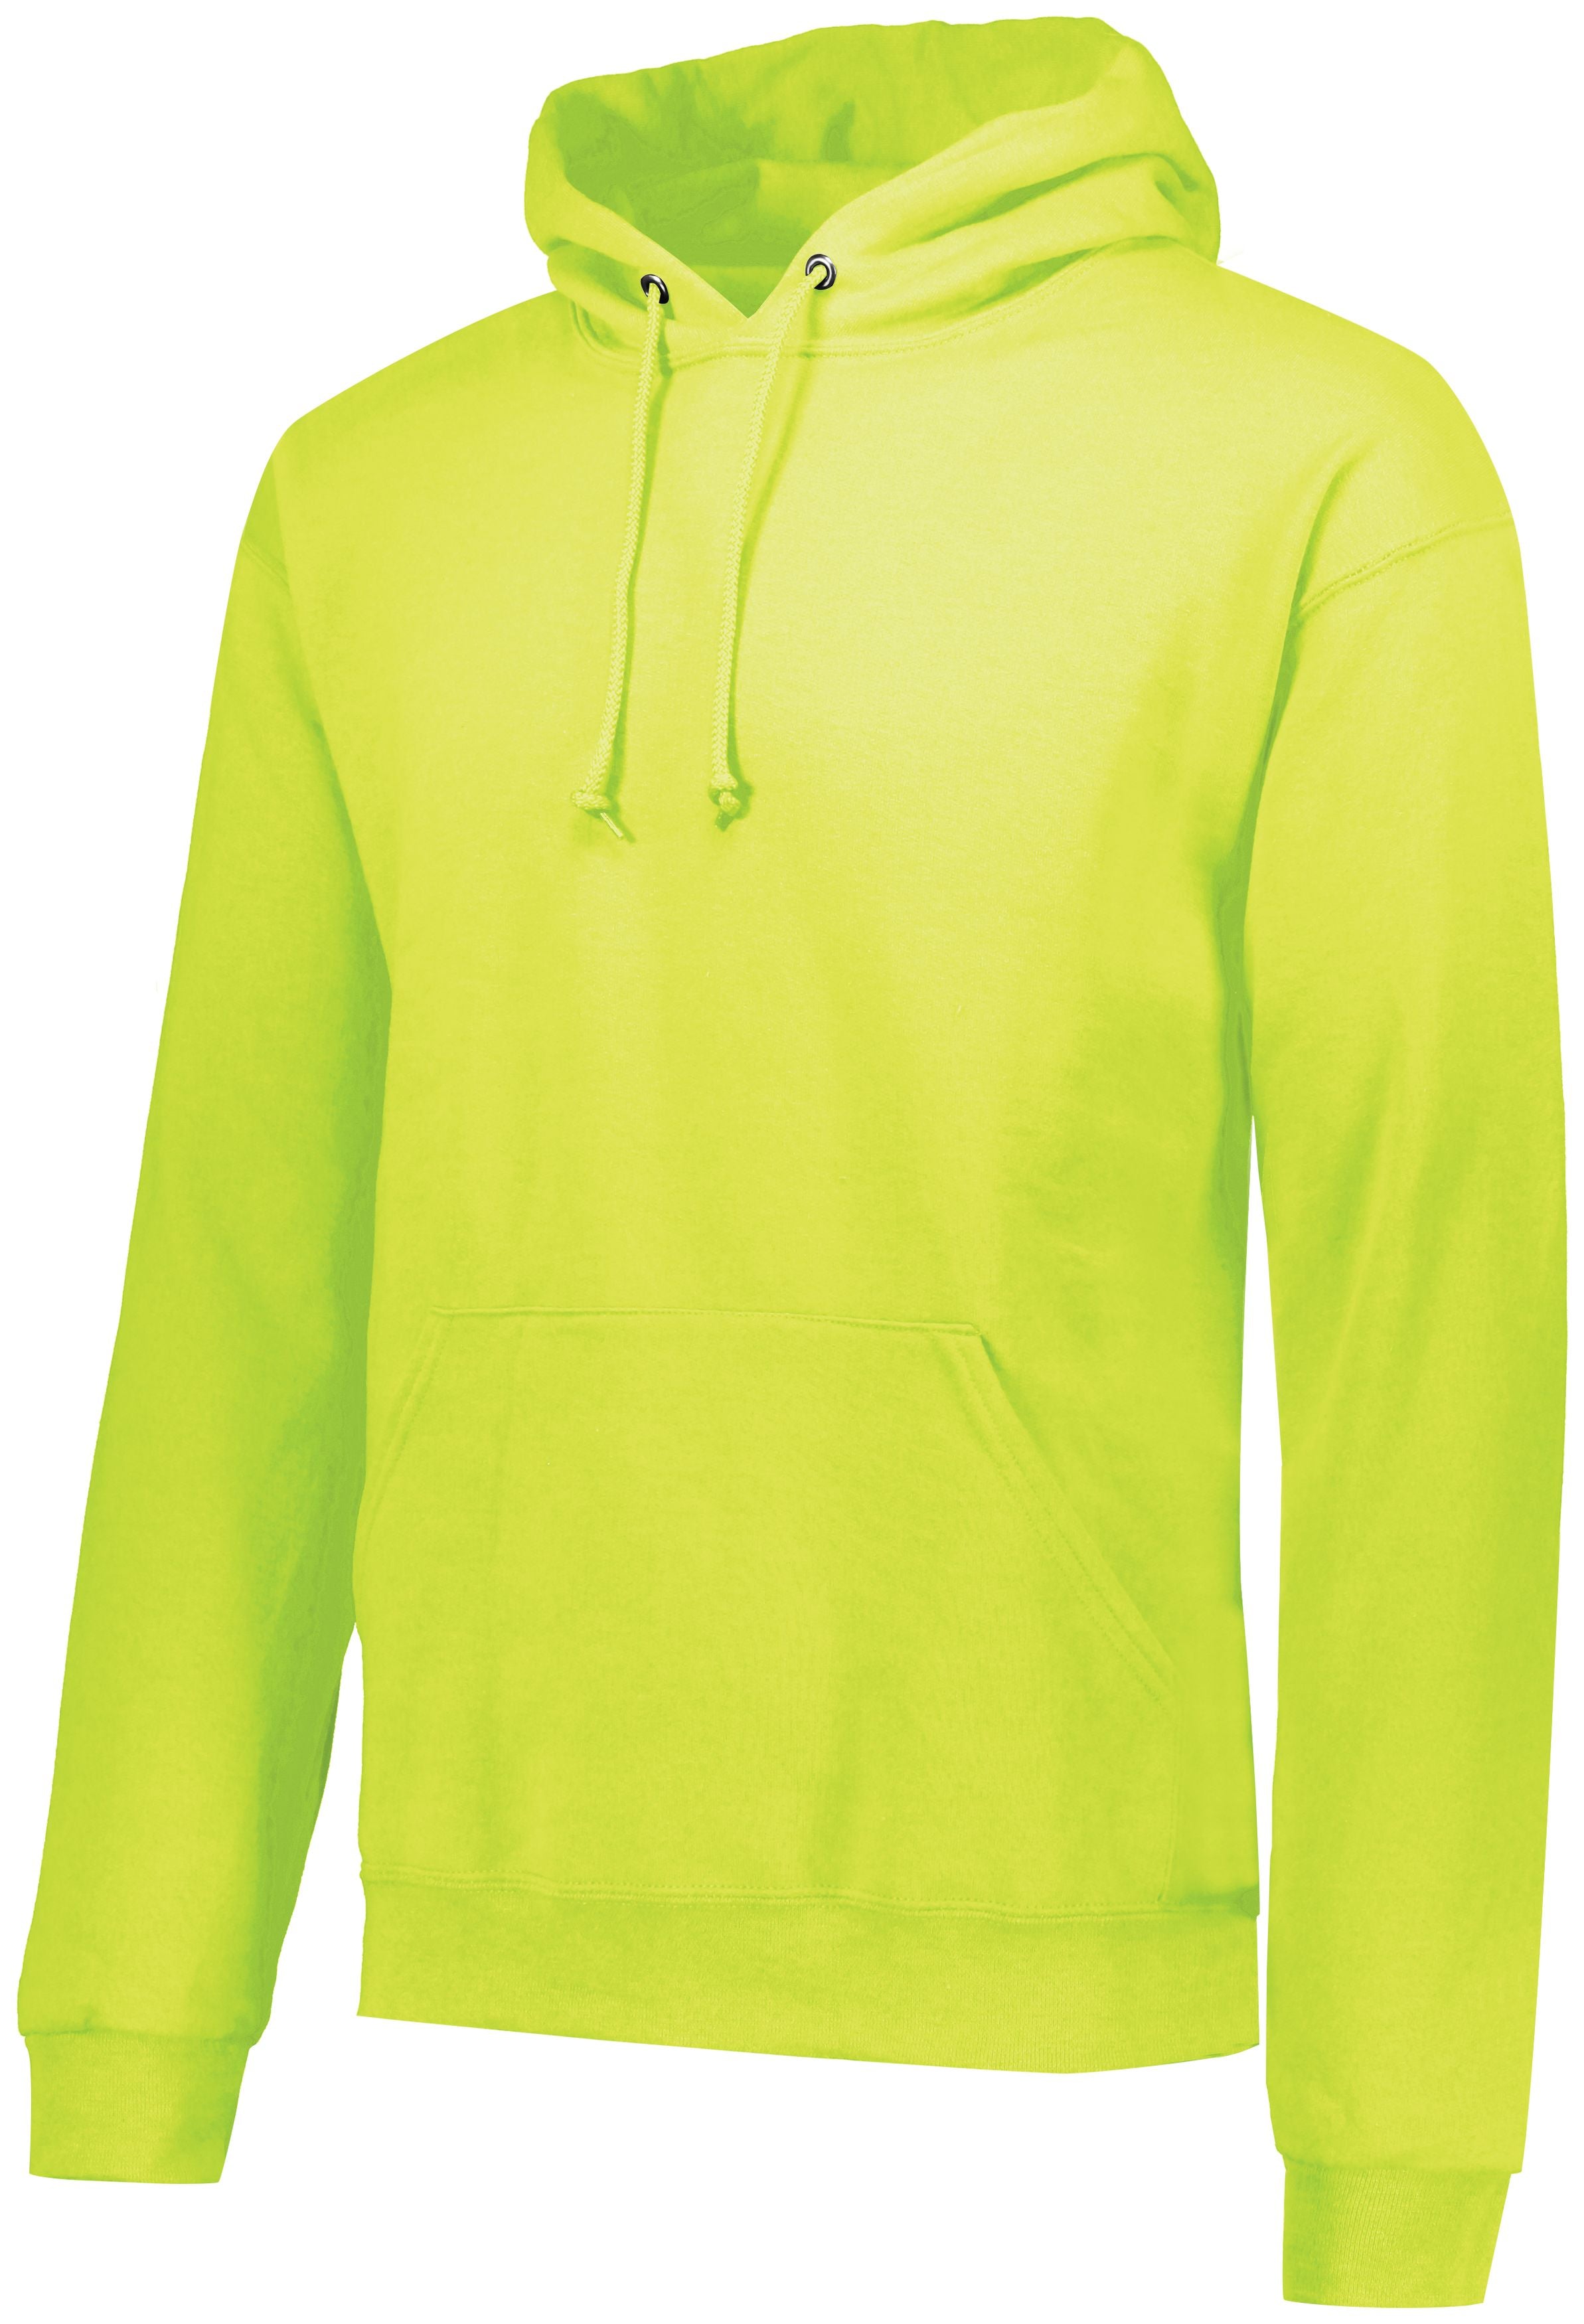 Russell Athletic Jerzees 50/50 Hoodie in Safety Green  -Part of the Adult, Russell-Athletic-Products, Shirts product lines at KanaleyCreations.com